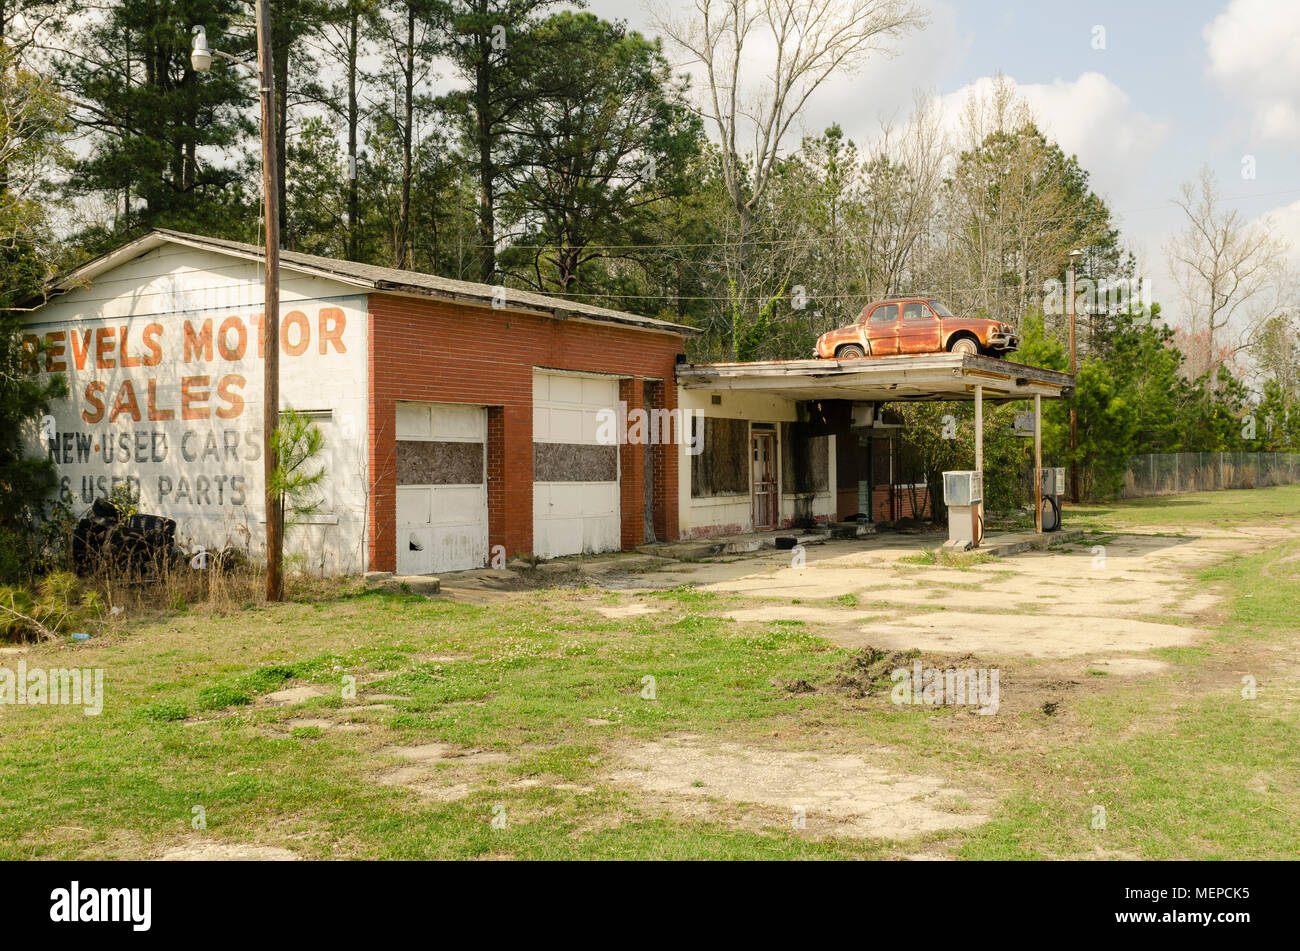 PARKTON, NC - 18 March 2012: Gas Station & Revels Motor Sales Out of Business Stock Photo